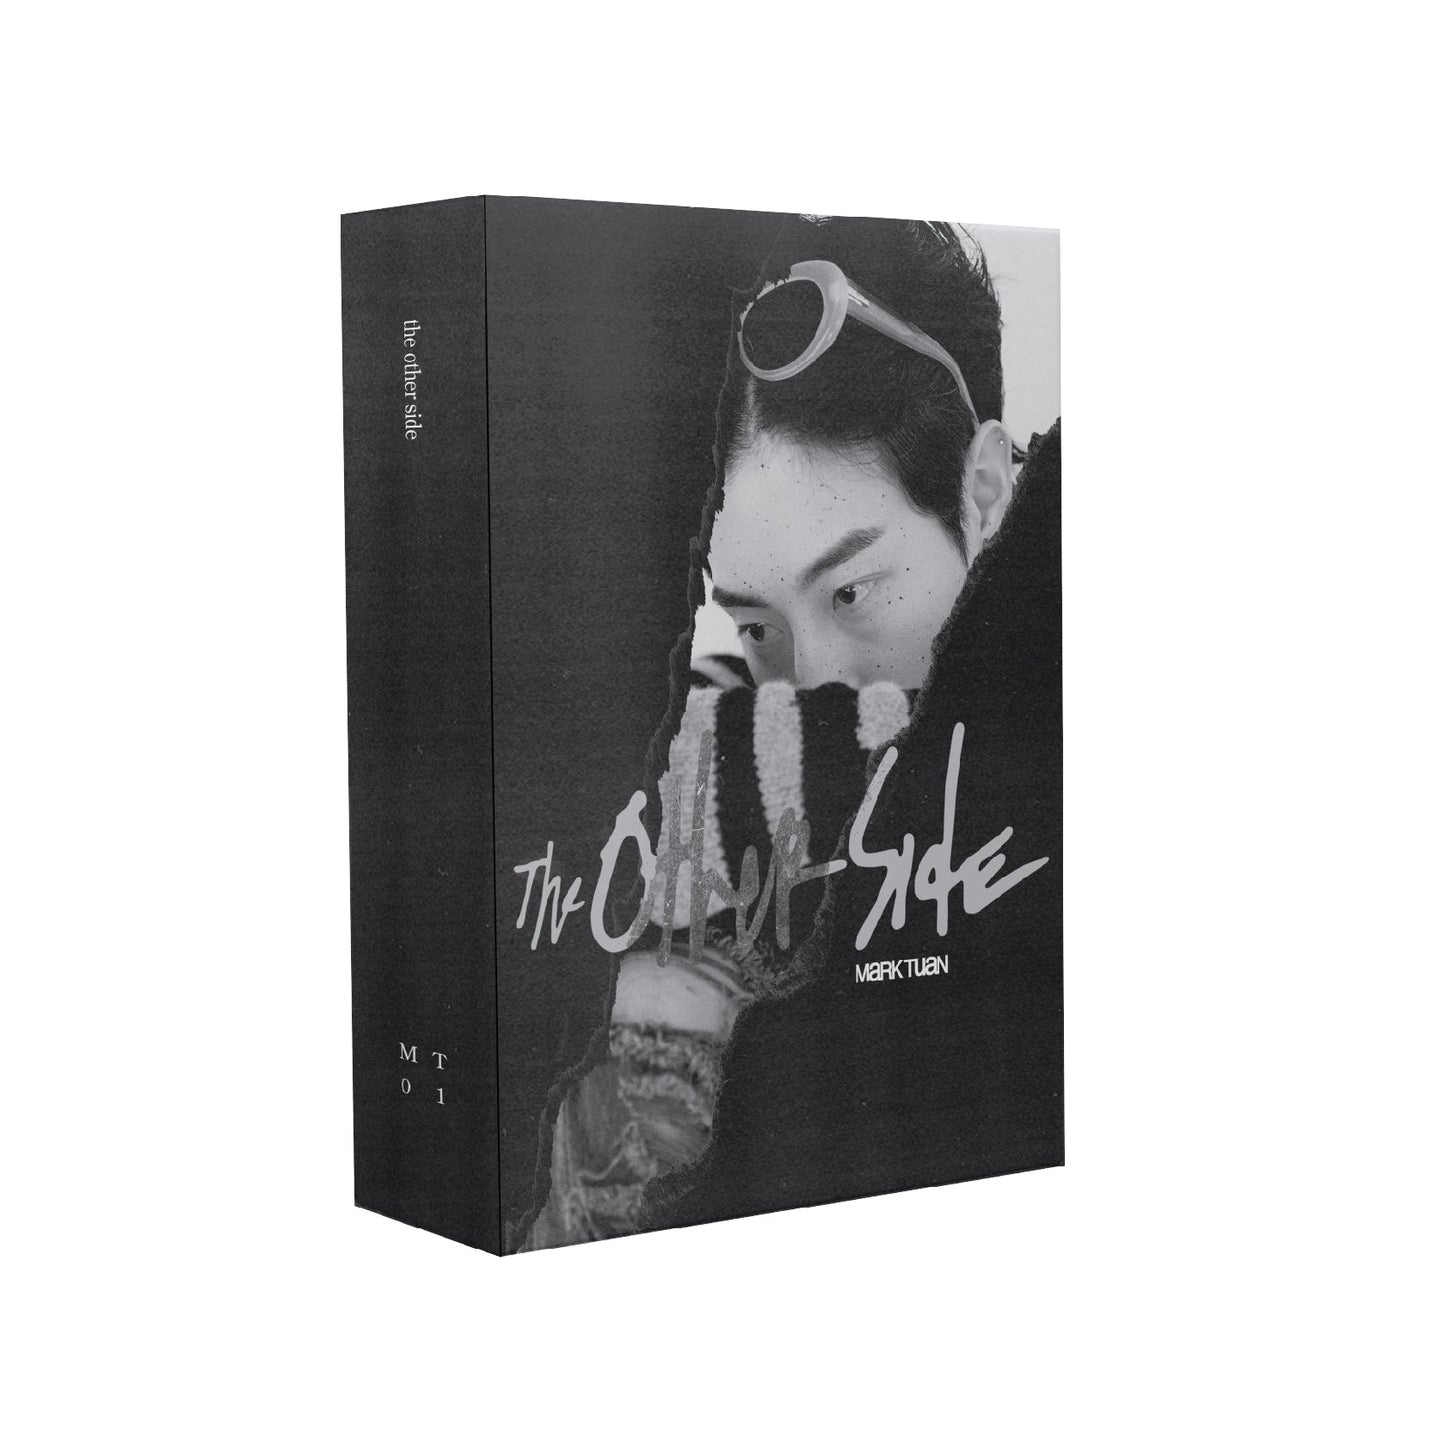 MARK TUAN (GOT7) ALBUM 'THE OTHER SIDE' COVER